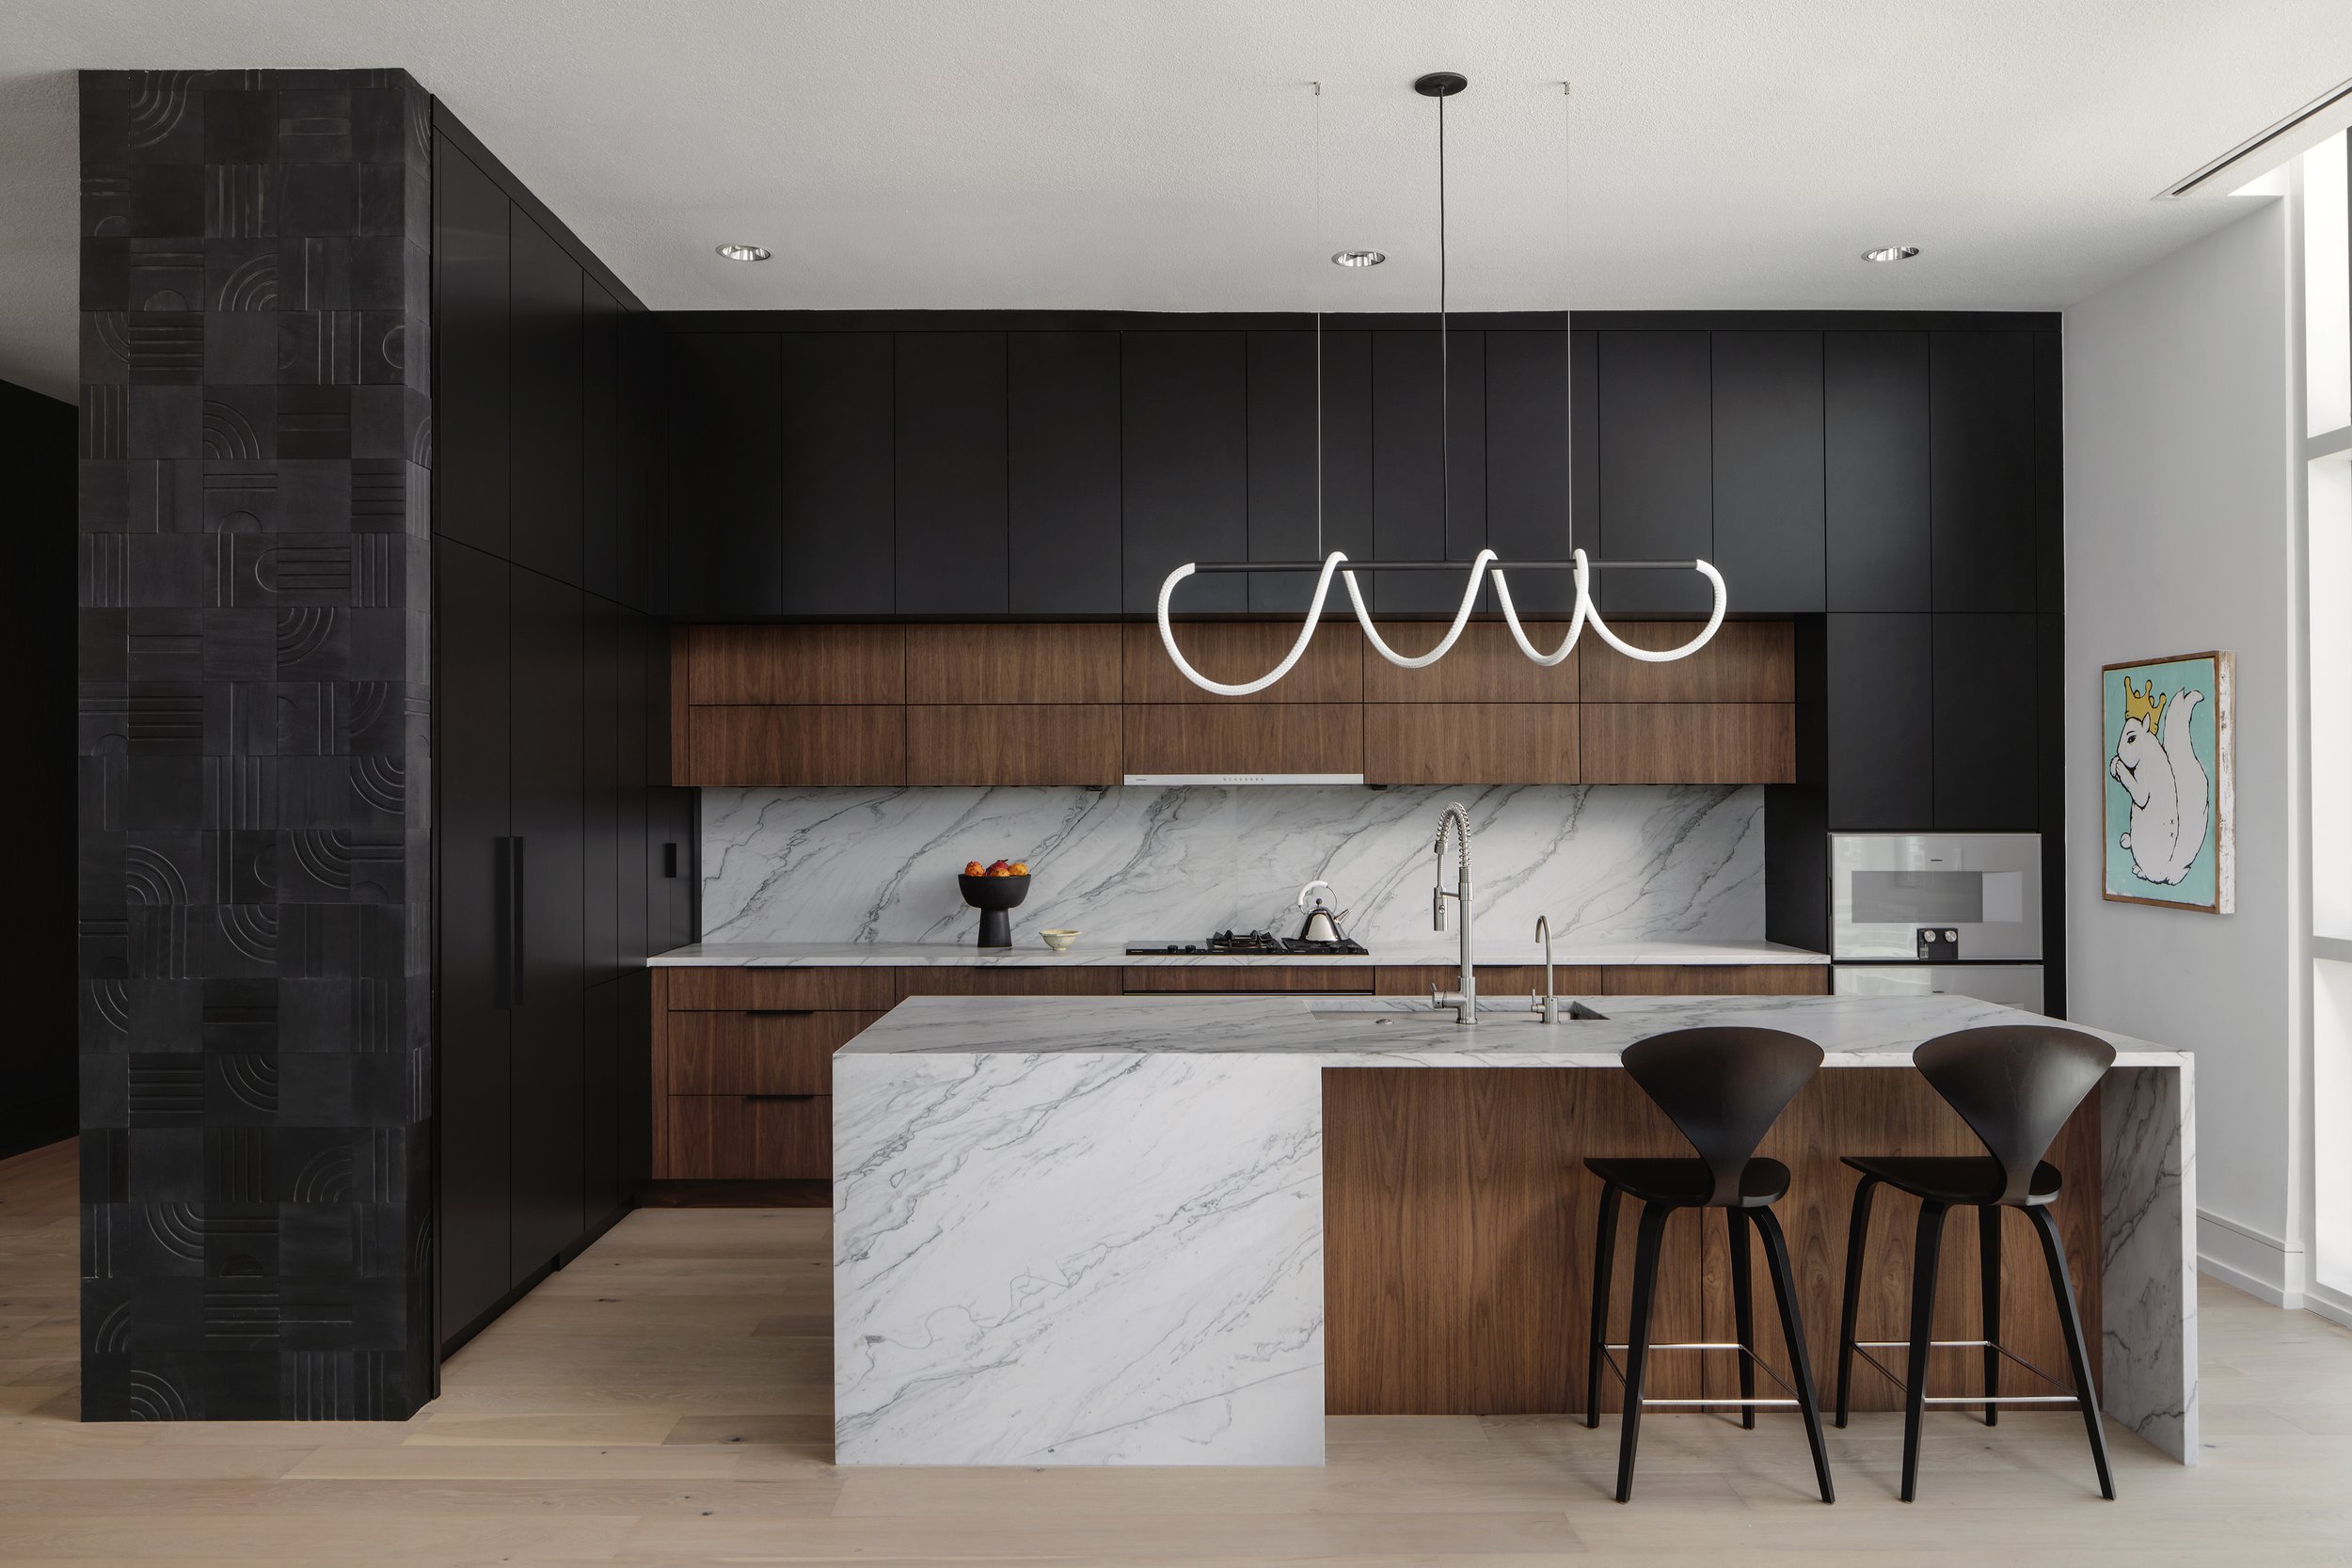   Tracer Bar 1.1  in this sleek kitchen by Slic Design. Photographed by Chase Daniel. 